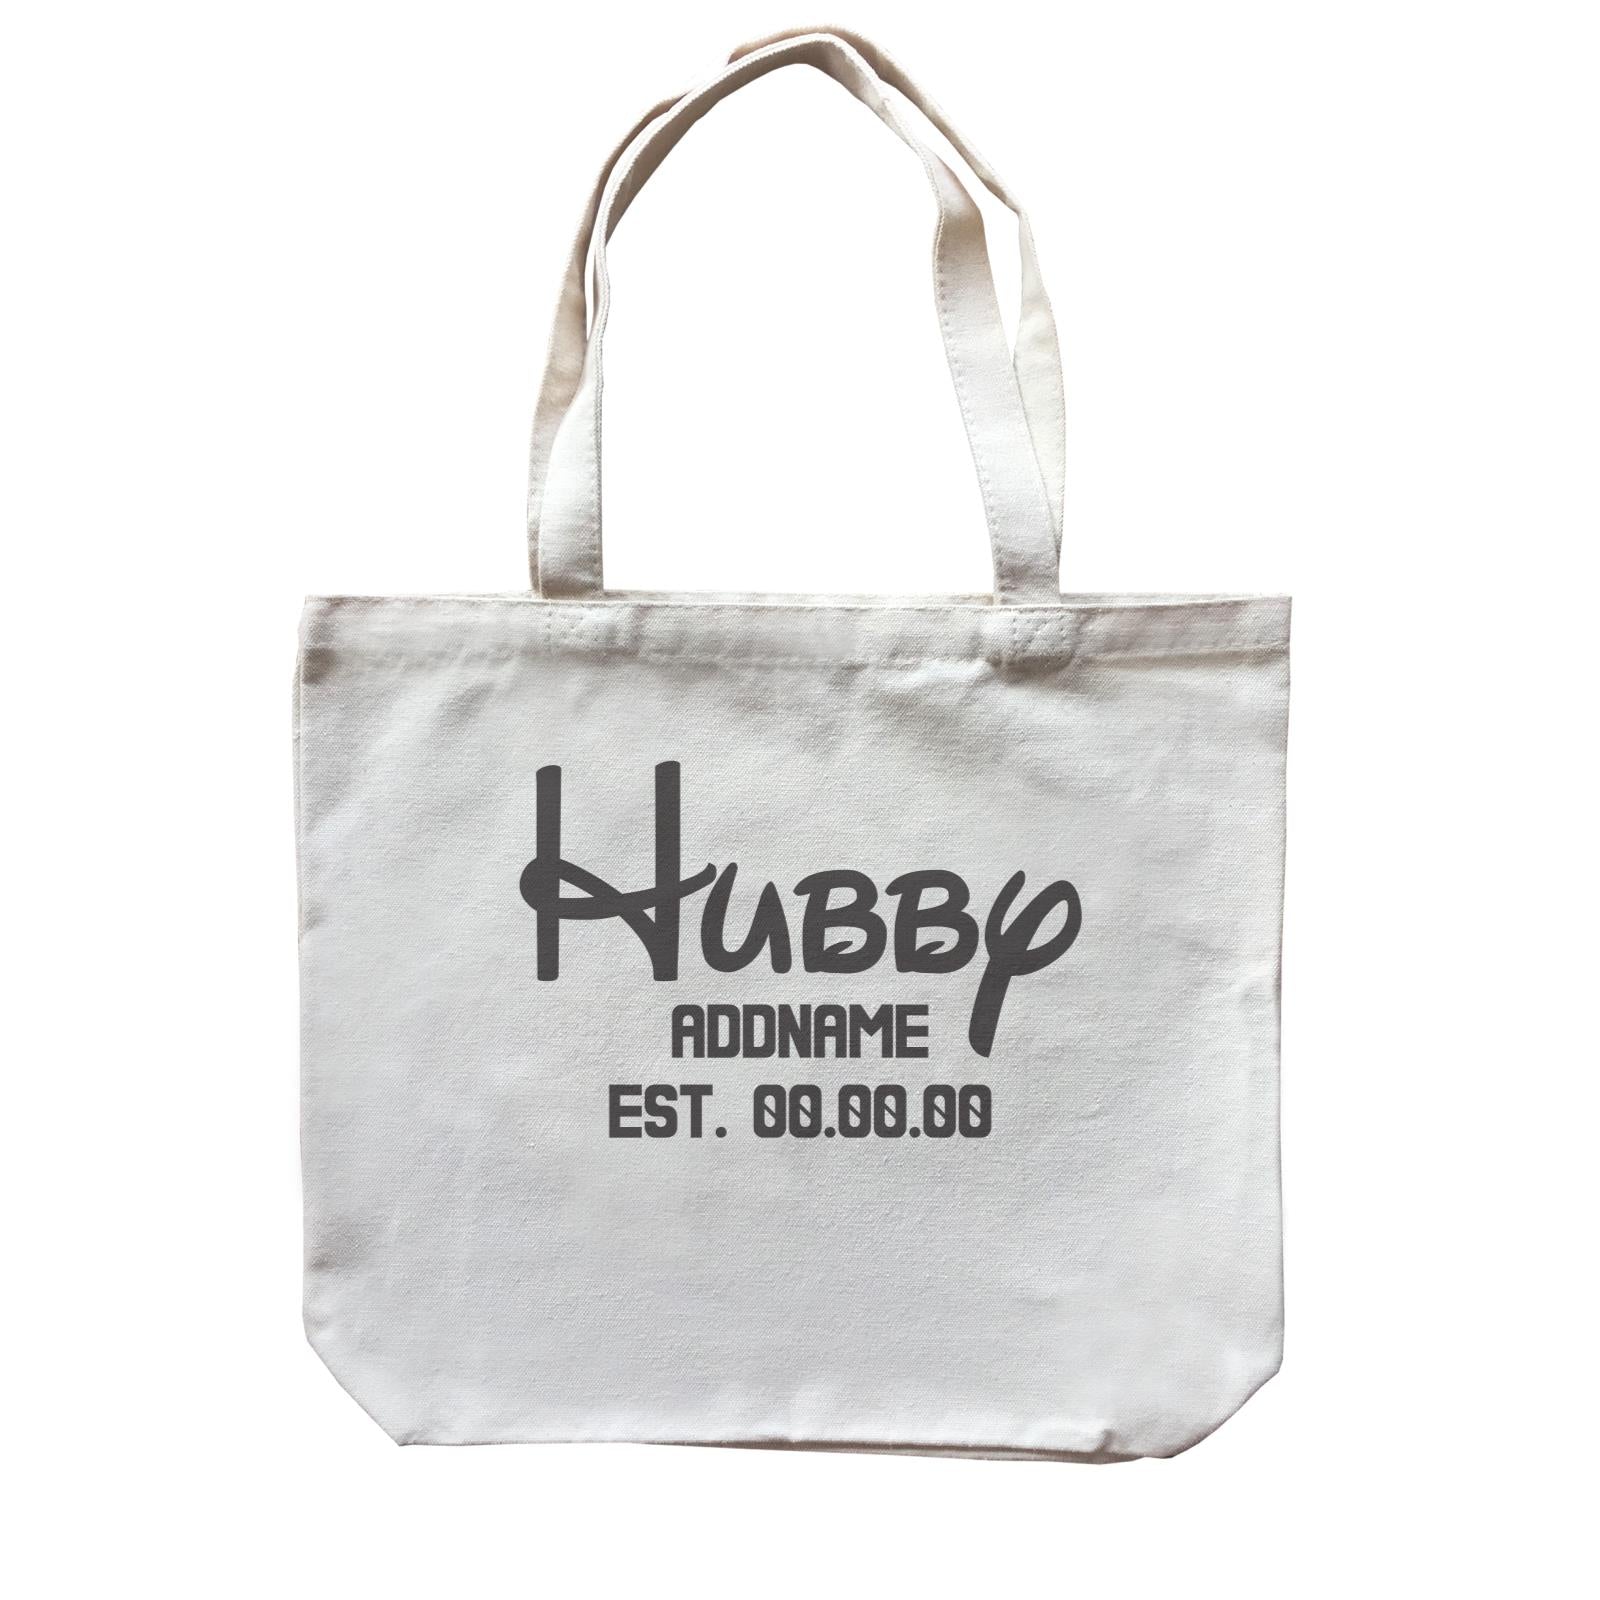 Husband and Wife Hubby Addname With Date Canvas Bag